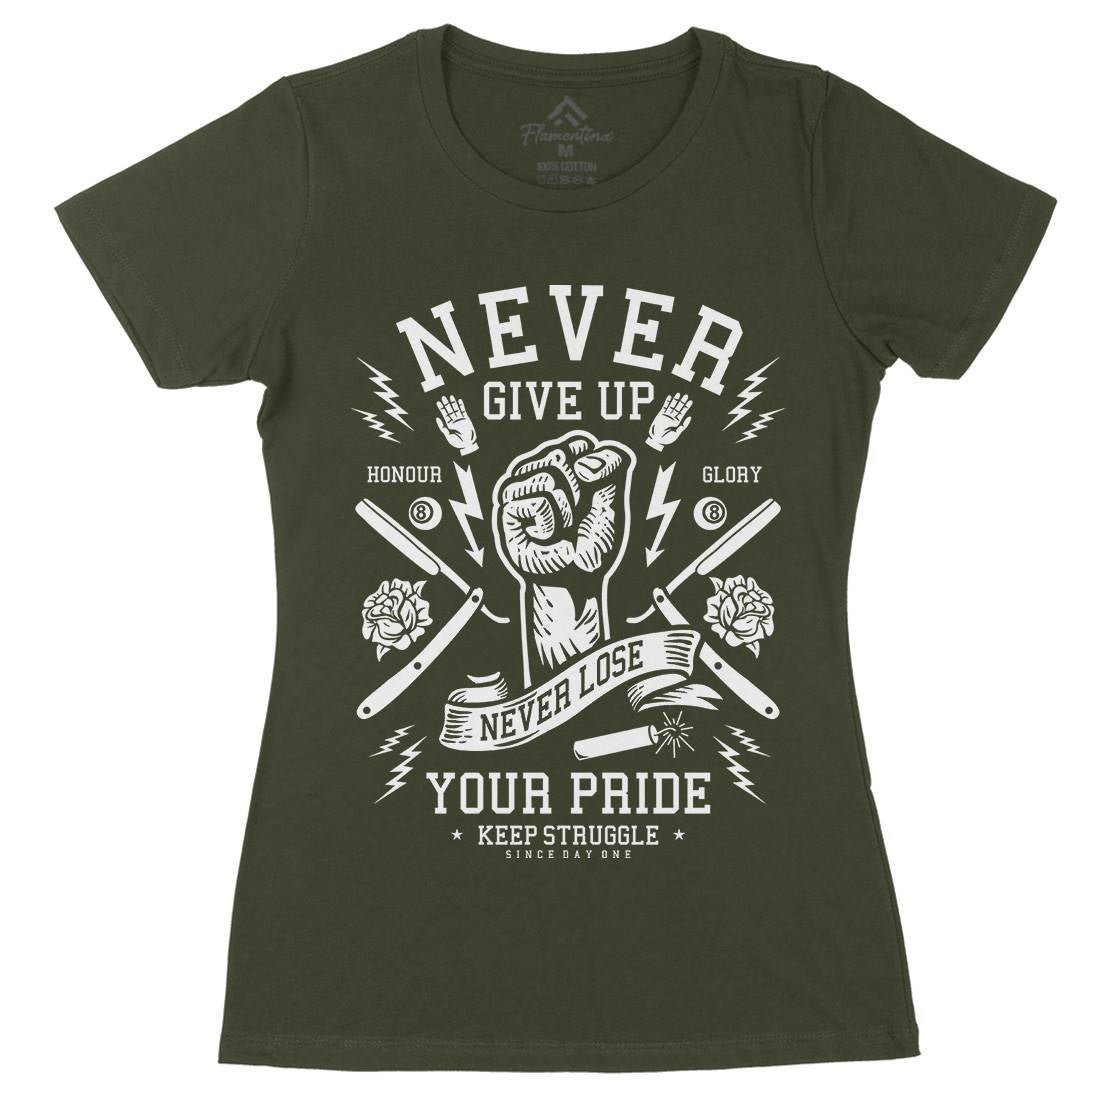 Never Give Up Womens Organic Crew Neck T-Shirt Quotes A254